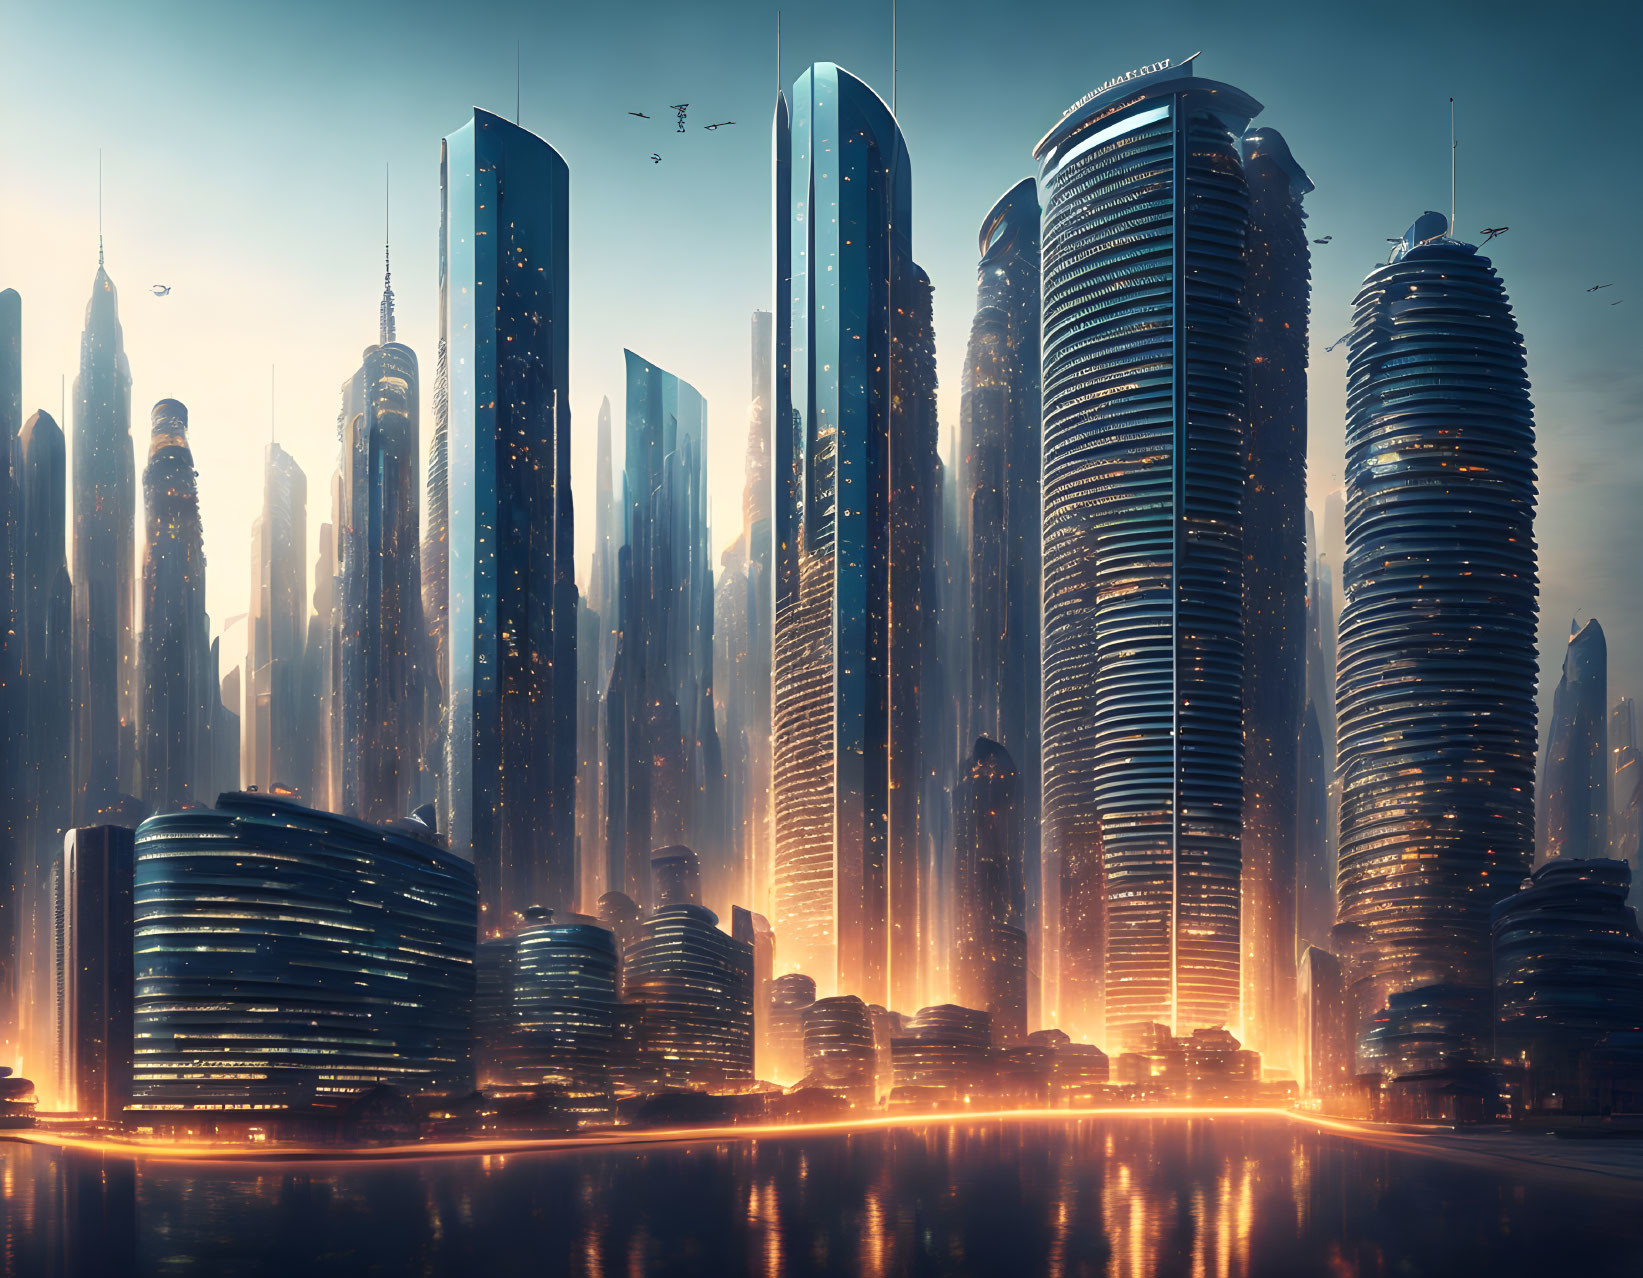 Futuristic cityscape with towering skyscrapers and flying vehicles in orange light